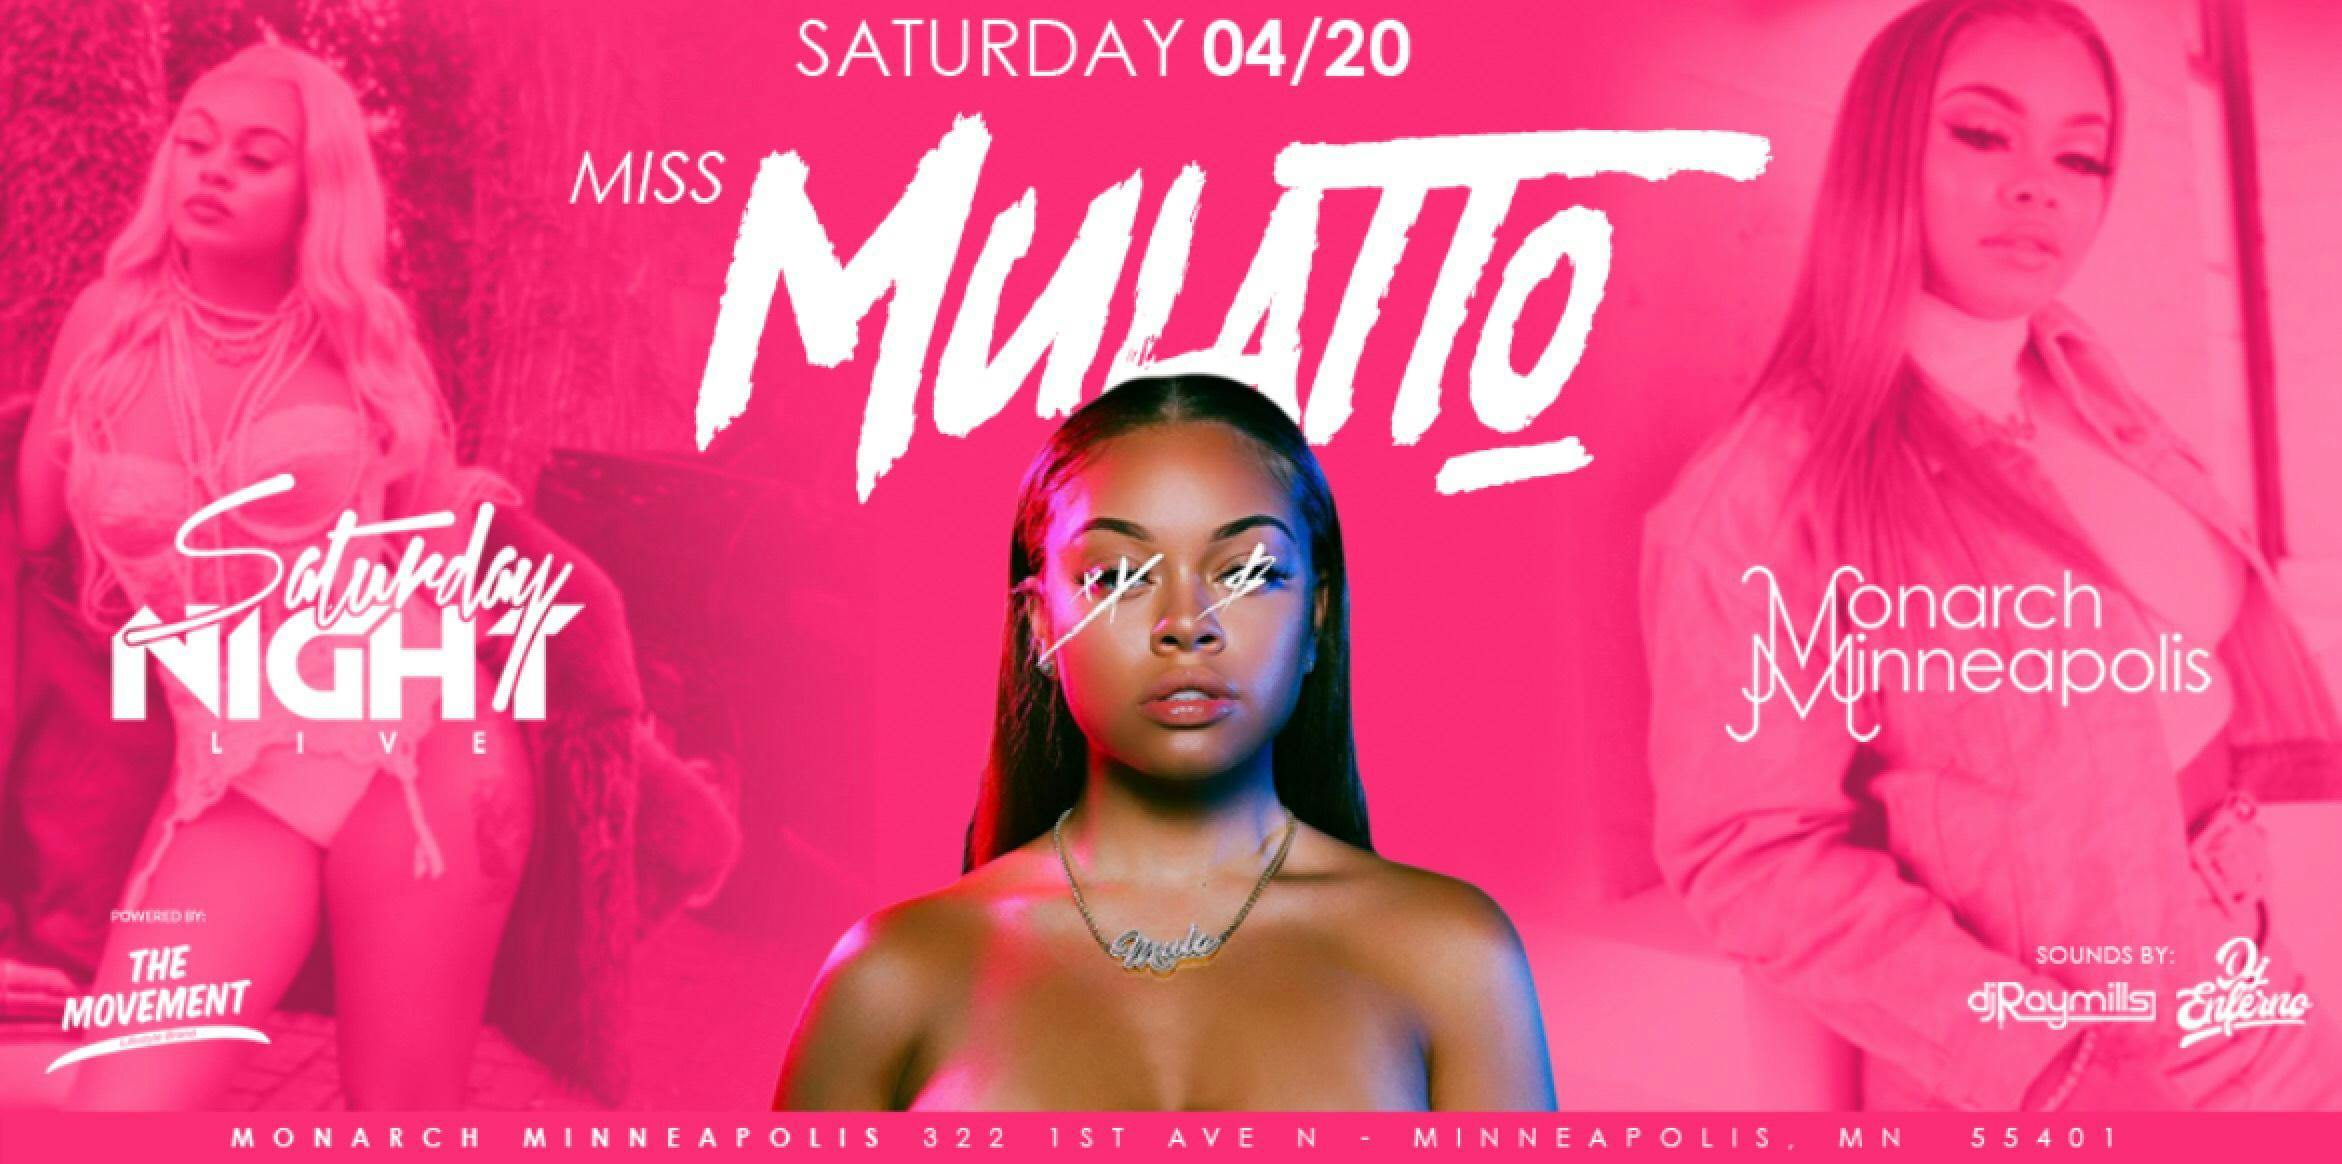 THE MOVEMENT PRESENTS: SATURDAY NIGHT LIVE HOSTED BY MISS MULATTO